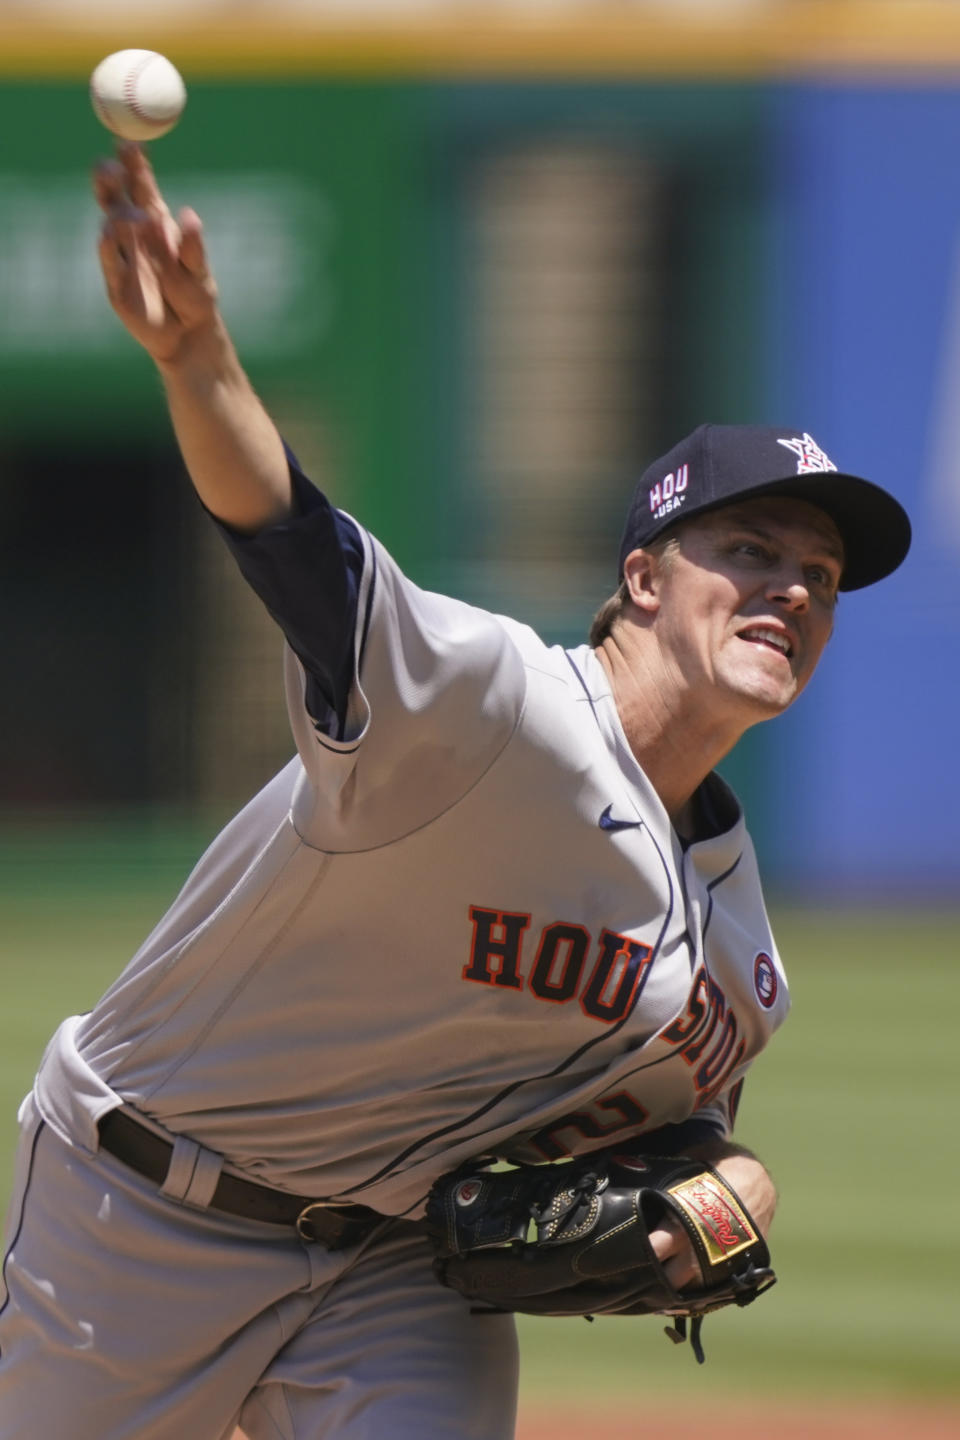 Houston Astros starting pitcher Zack Greinke delivers in the first inning of a baseball game against the Cleveland Indians, Sunday, July 4, 2021, in Cleveland. (AP Photo/Tony Dejak)